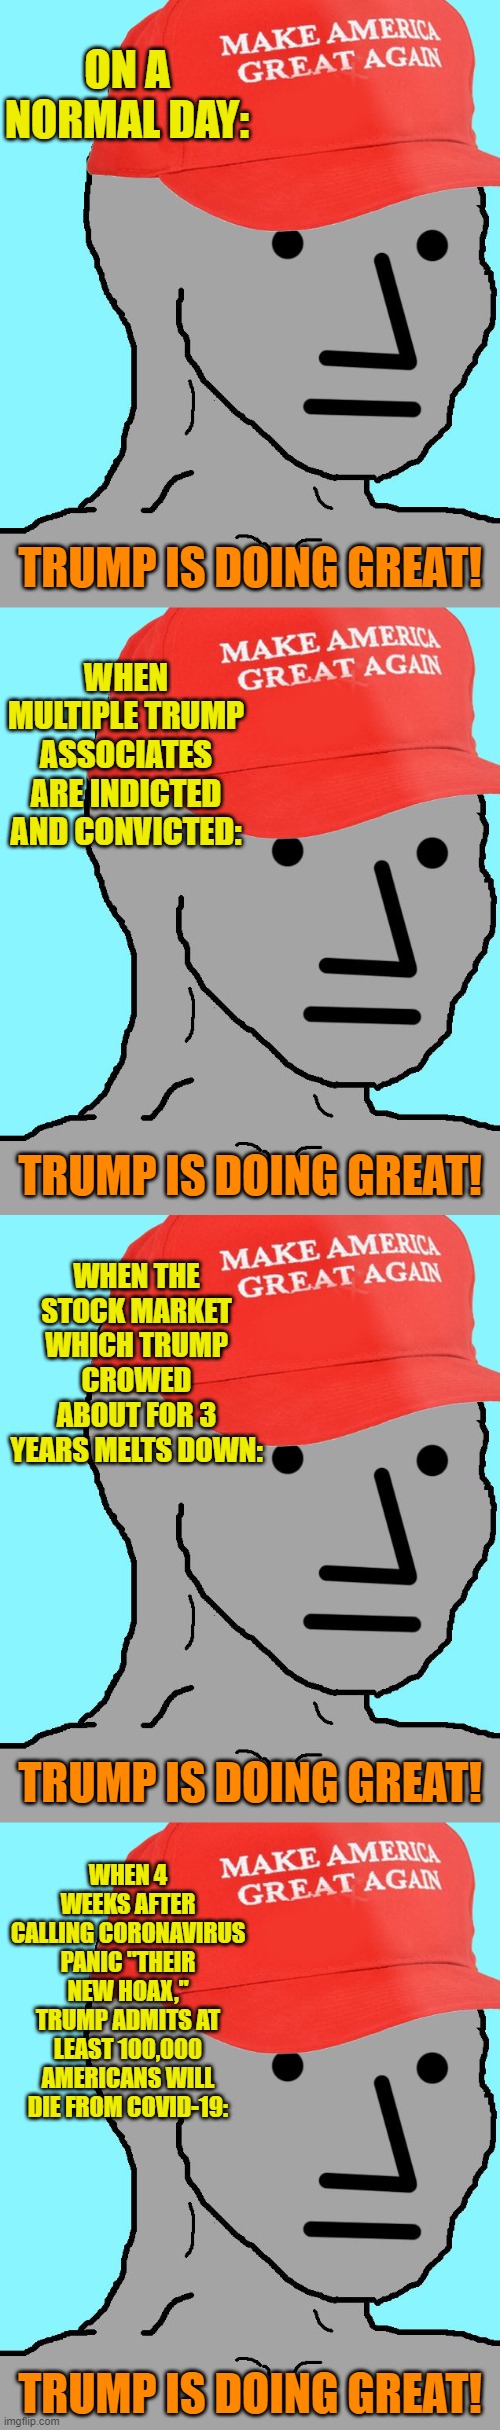 Does your local MAGA NPC have PTDS (Pro-Trump Derangement Syndrome)? Check for the disease progression indicated here. | ON A NORMAL DAY:; TRUMP IS DOING GREAT! WHEN MULTIPLE TRUMP ASSOCIATES ARE INDICTED AND CONVICTED:; TRUMP IS DOING GREAT! WHEN THE STOCK MARKET WHICH TRUMP CROWED ABOUT FOR 3 YEARS MELTS DOWN:; TRUMP IS DOING GREAT! WHEN 4 WEEKS AFTER CALLING CORONAVIRUS PANIC "THEIR NEW HOAX," TRUMP ADMITS AT LEAST 100,000 AMERICANS WILL DIE FROM COVID-19:; TRUMP IS DOING GREAT! | image tagged in maga npc,conservative logic,covid-19,coronavirus,robert mueller,stock crash | made w/ Imgflip meme maker